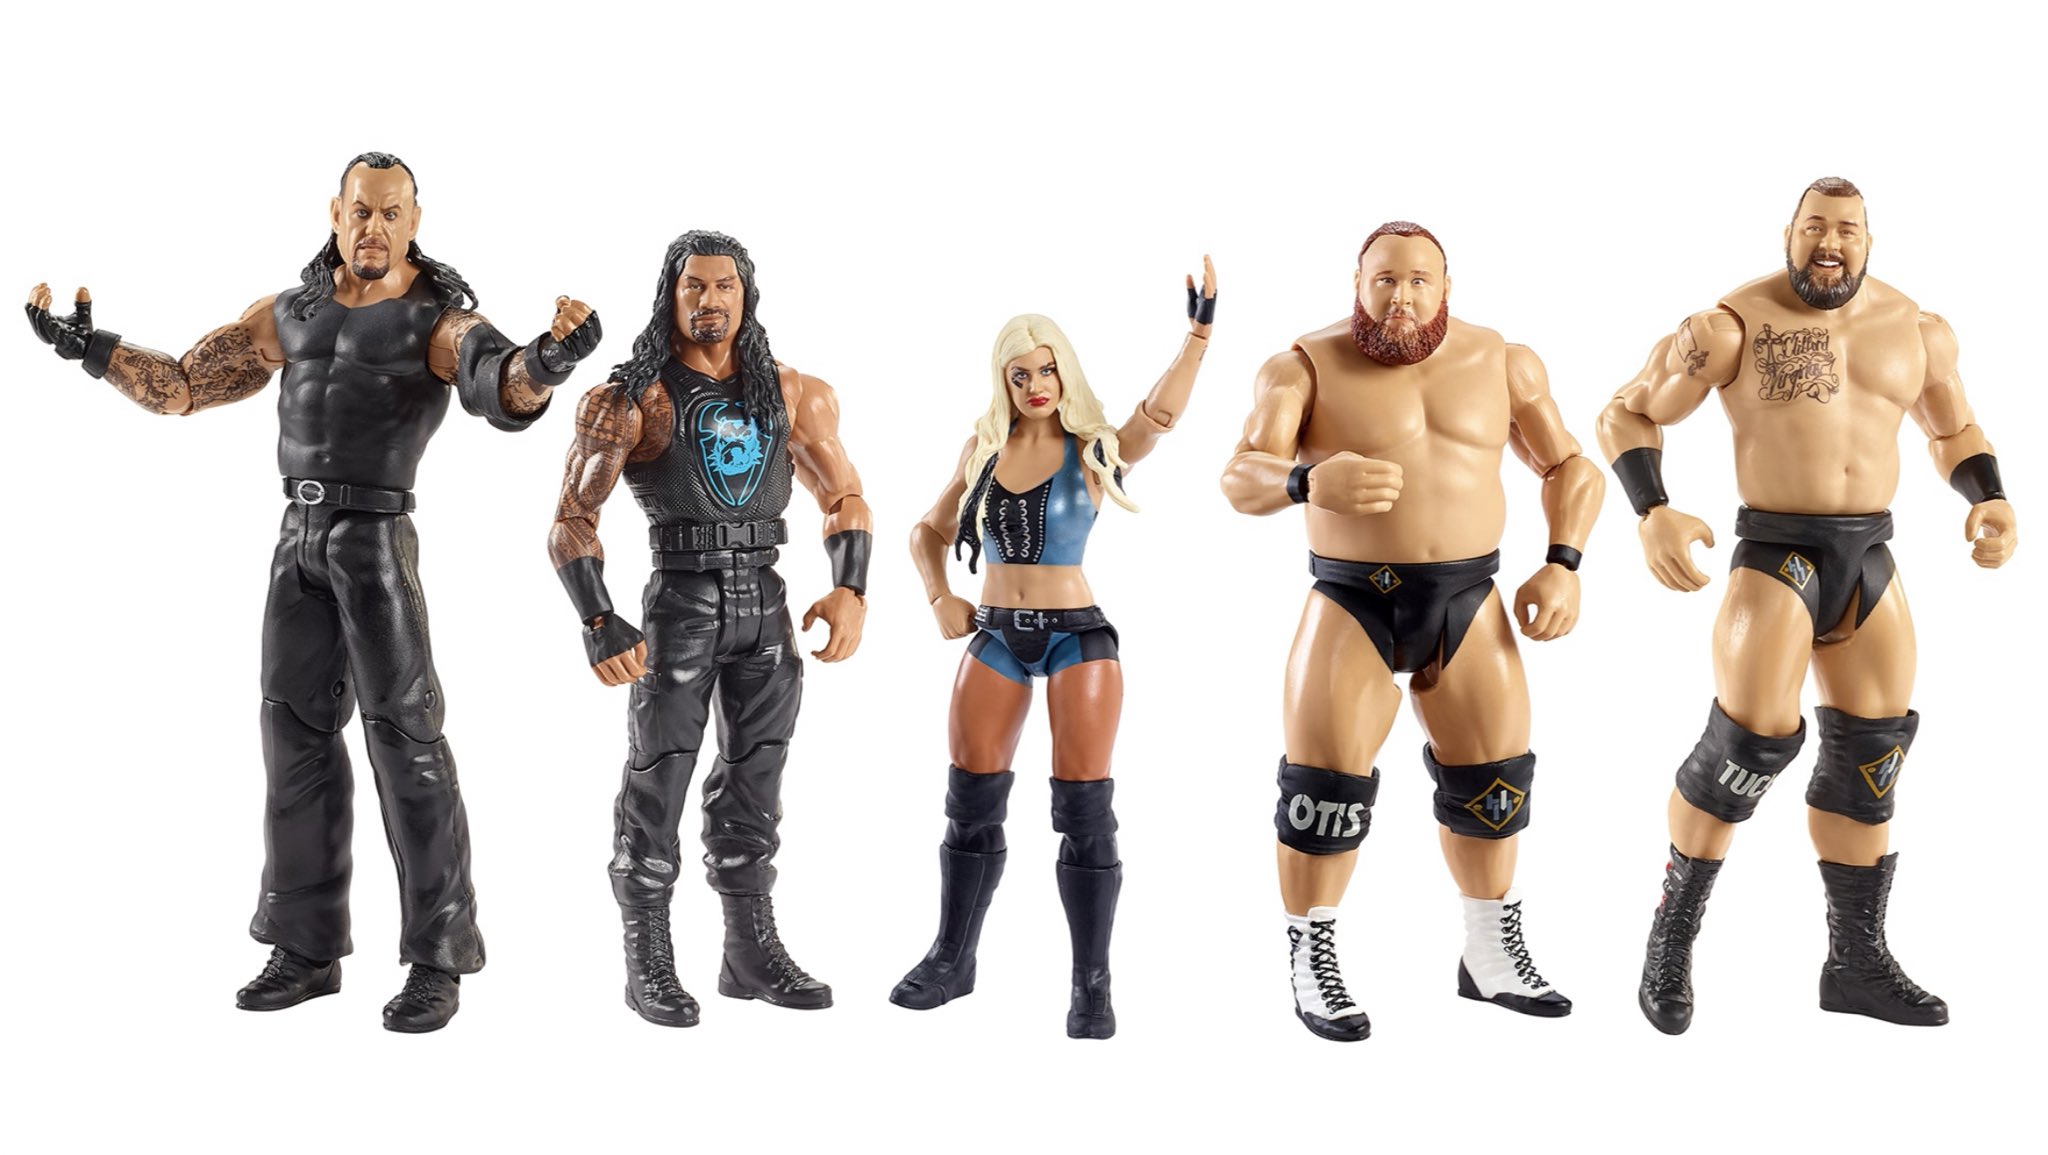 WWE Basic Series 117 Wrestling Action Figure Set Now Available At Phillips Toys